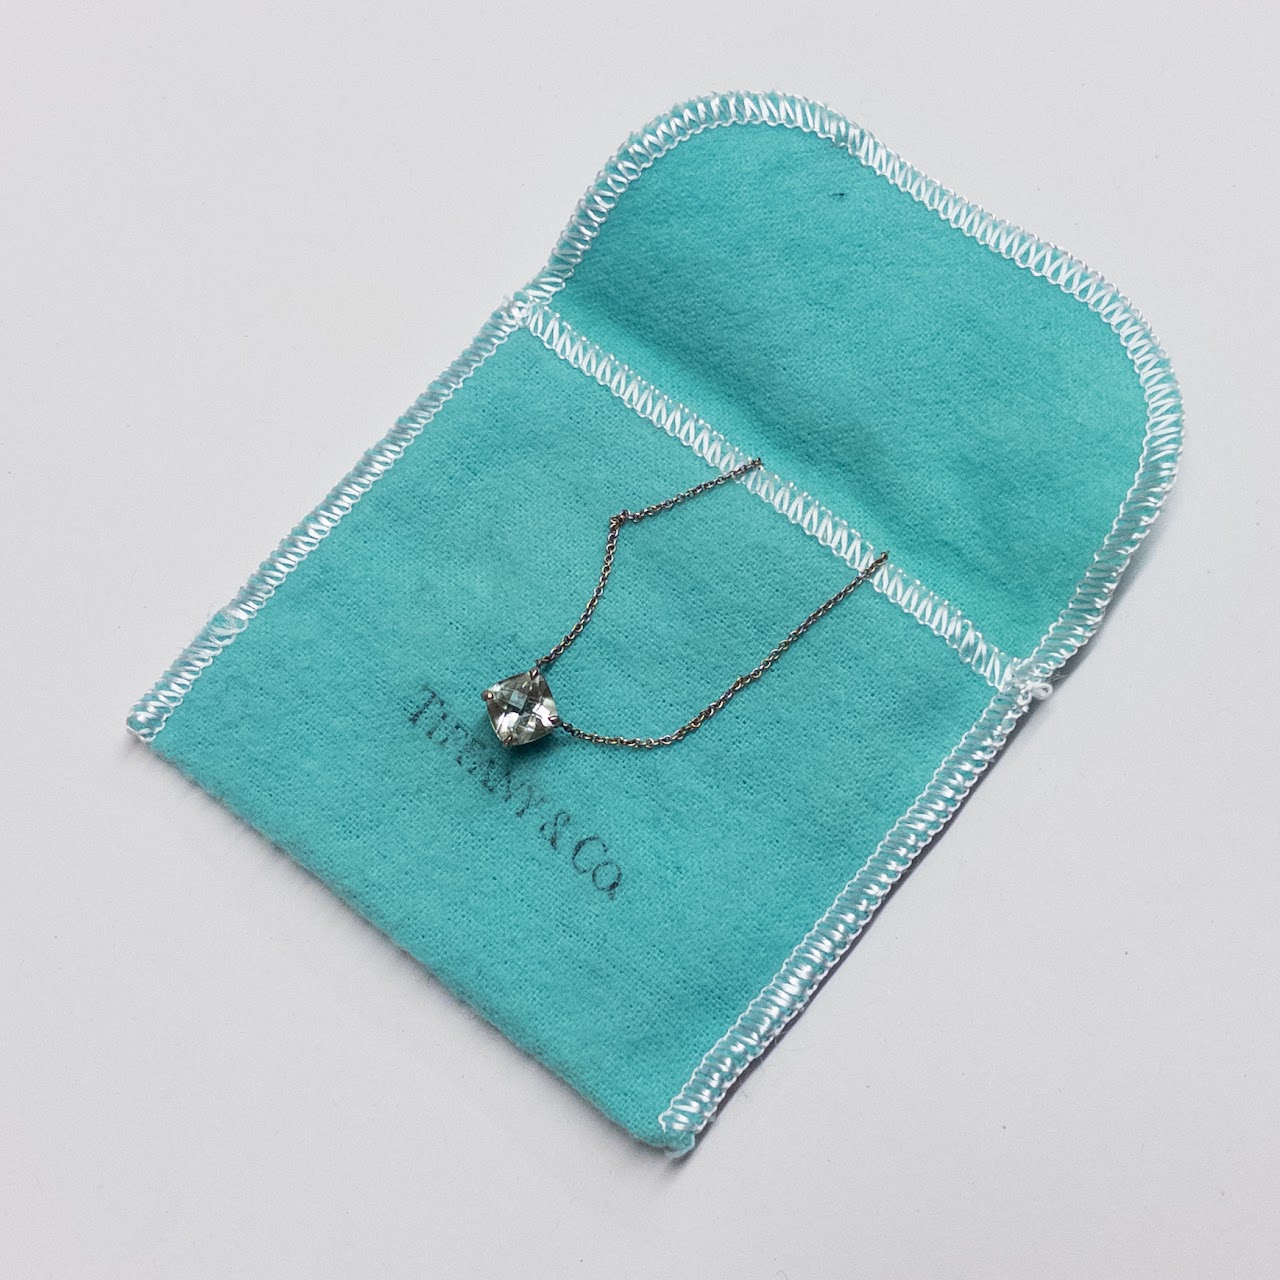 Tiffany & Co. Sterling Silver Rolo Chain Necklace with Square Crystal Pendant